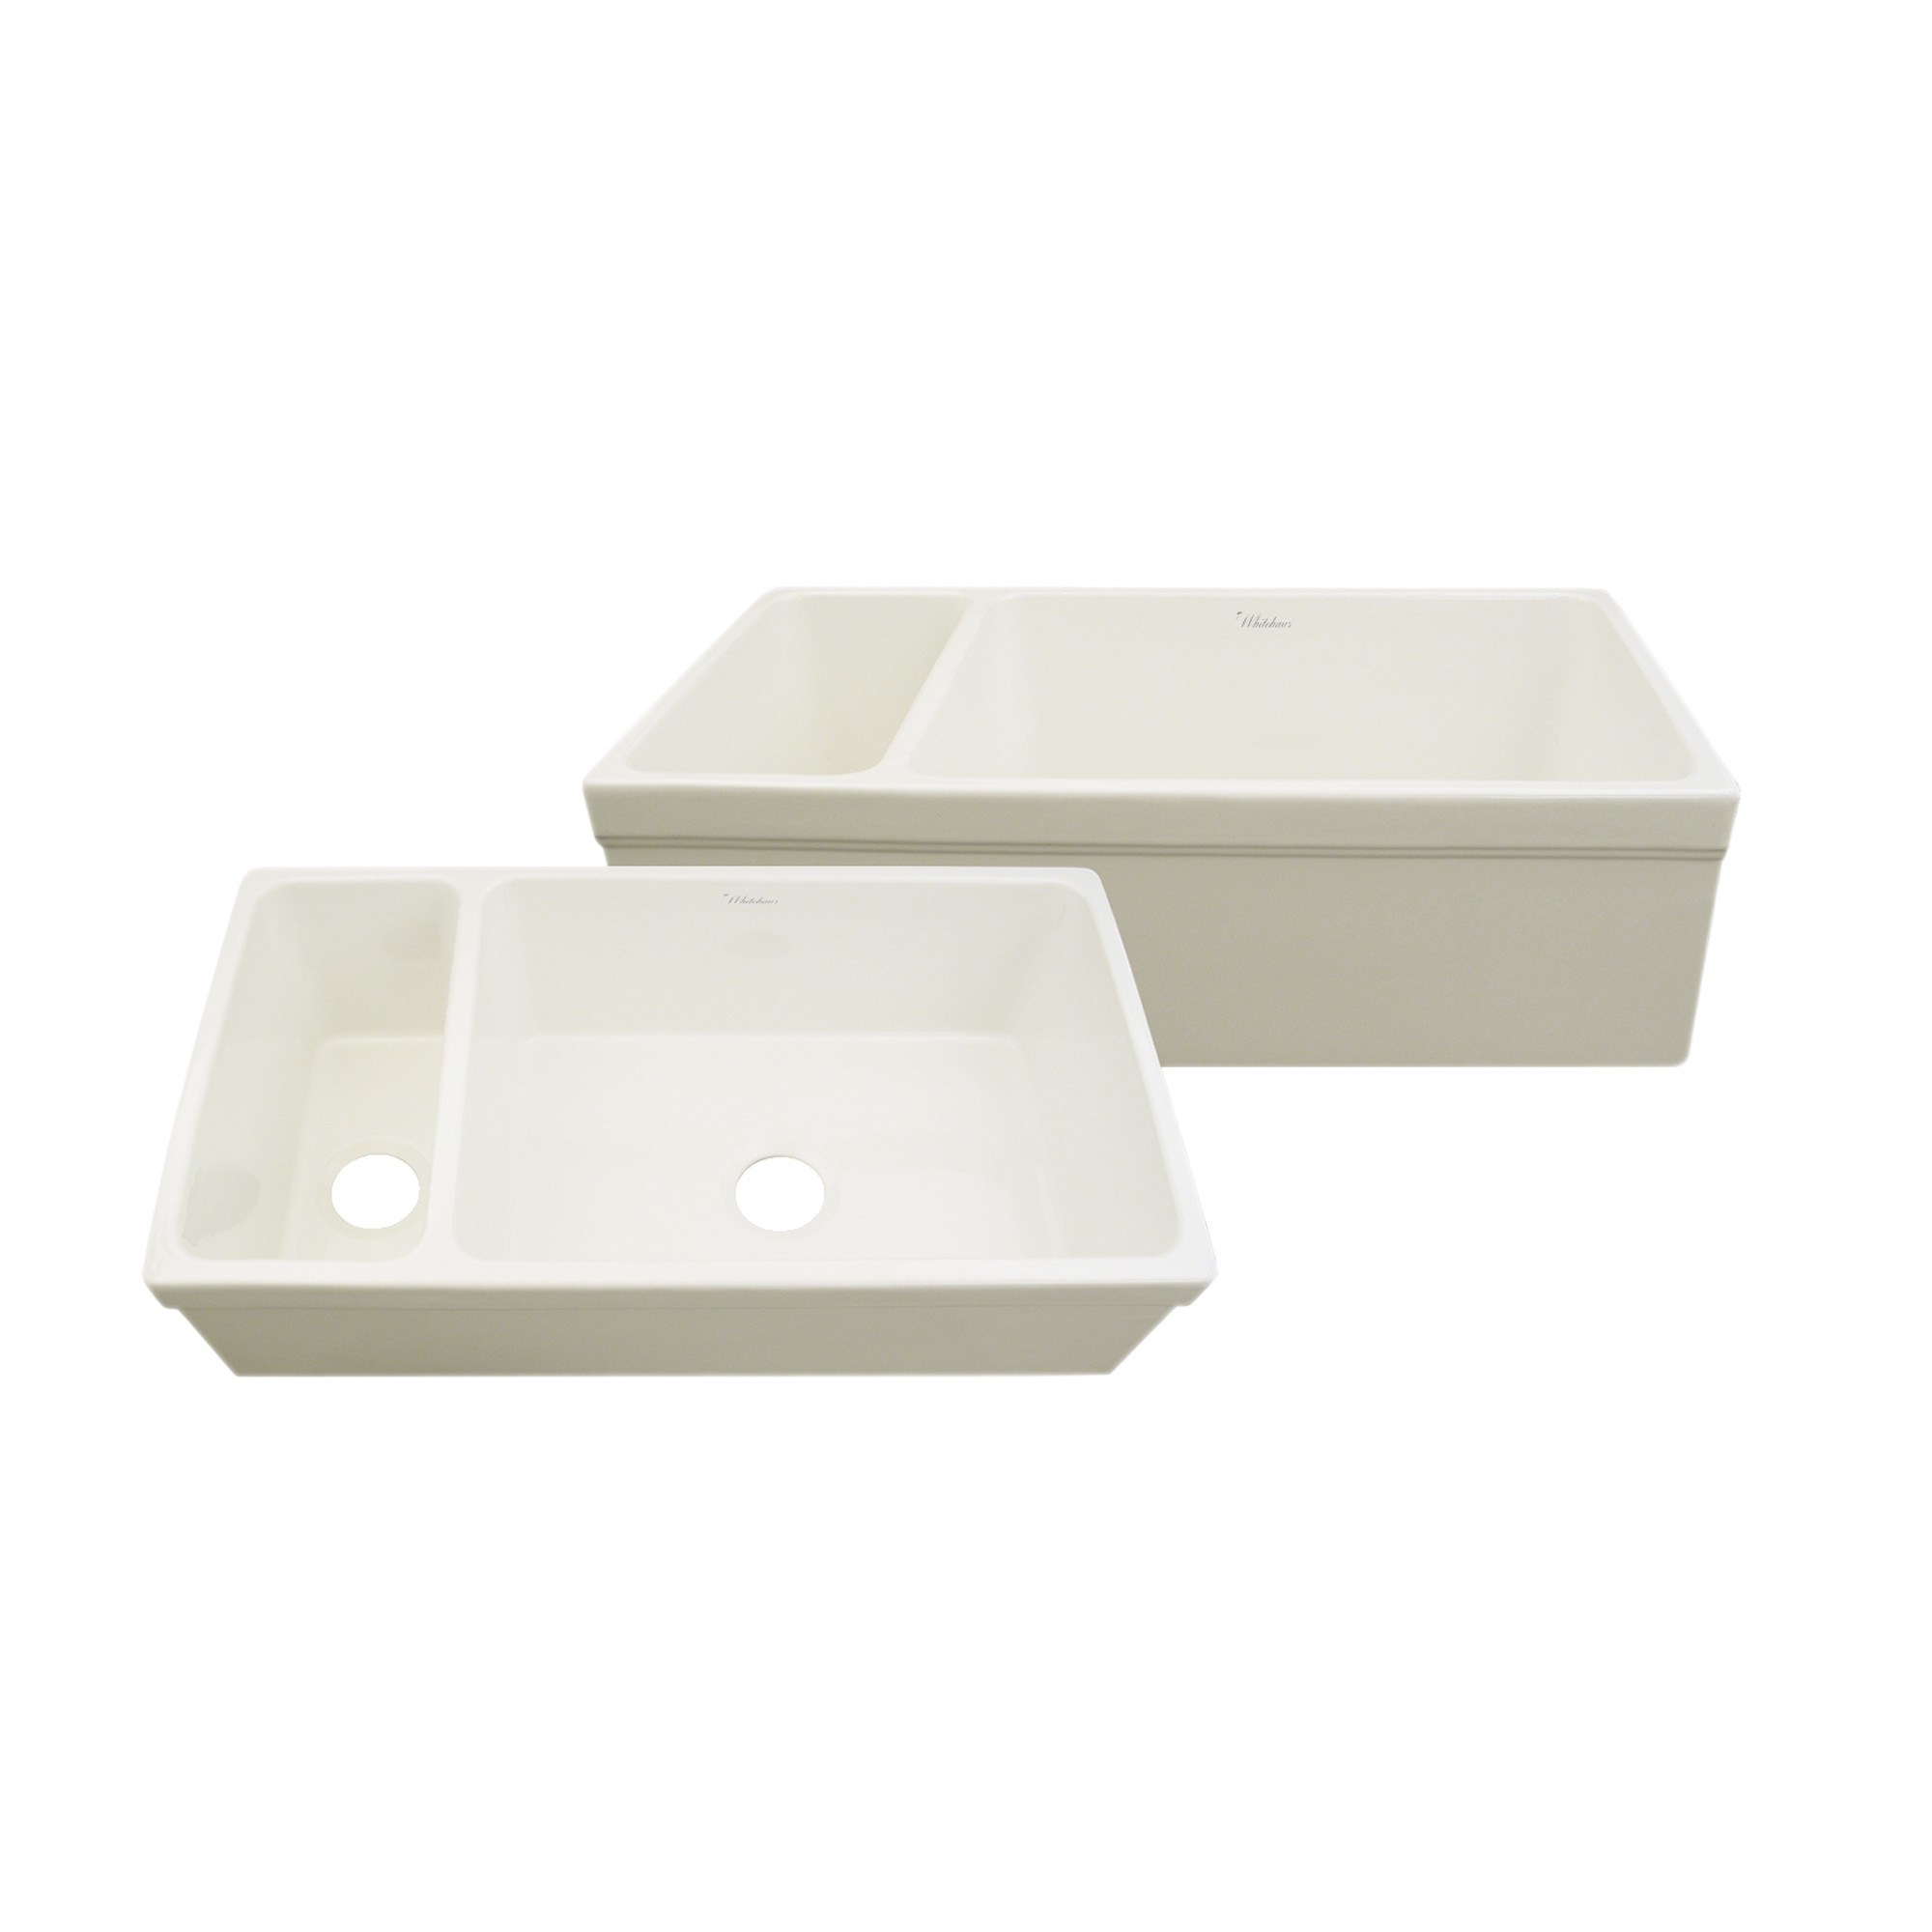 Farmhaus Fireclay Quatro Alcove Large Reversible Sink and Small Bowl with Decorative 2 +" Lip on Both Sides